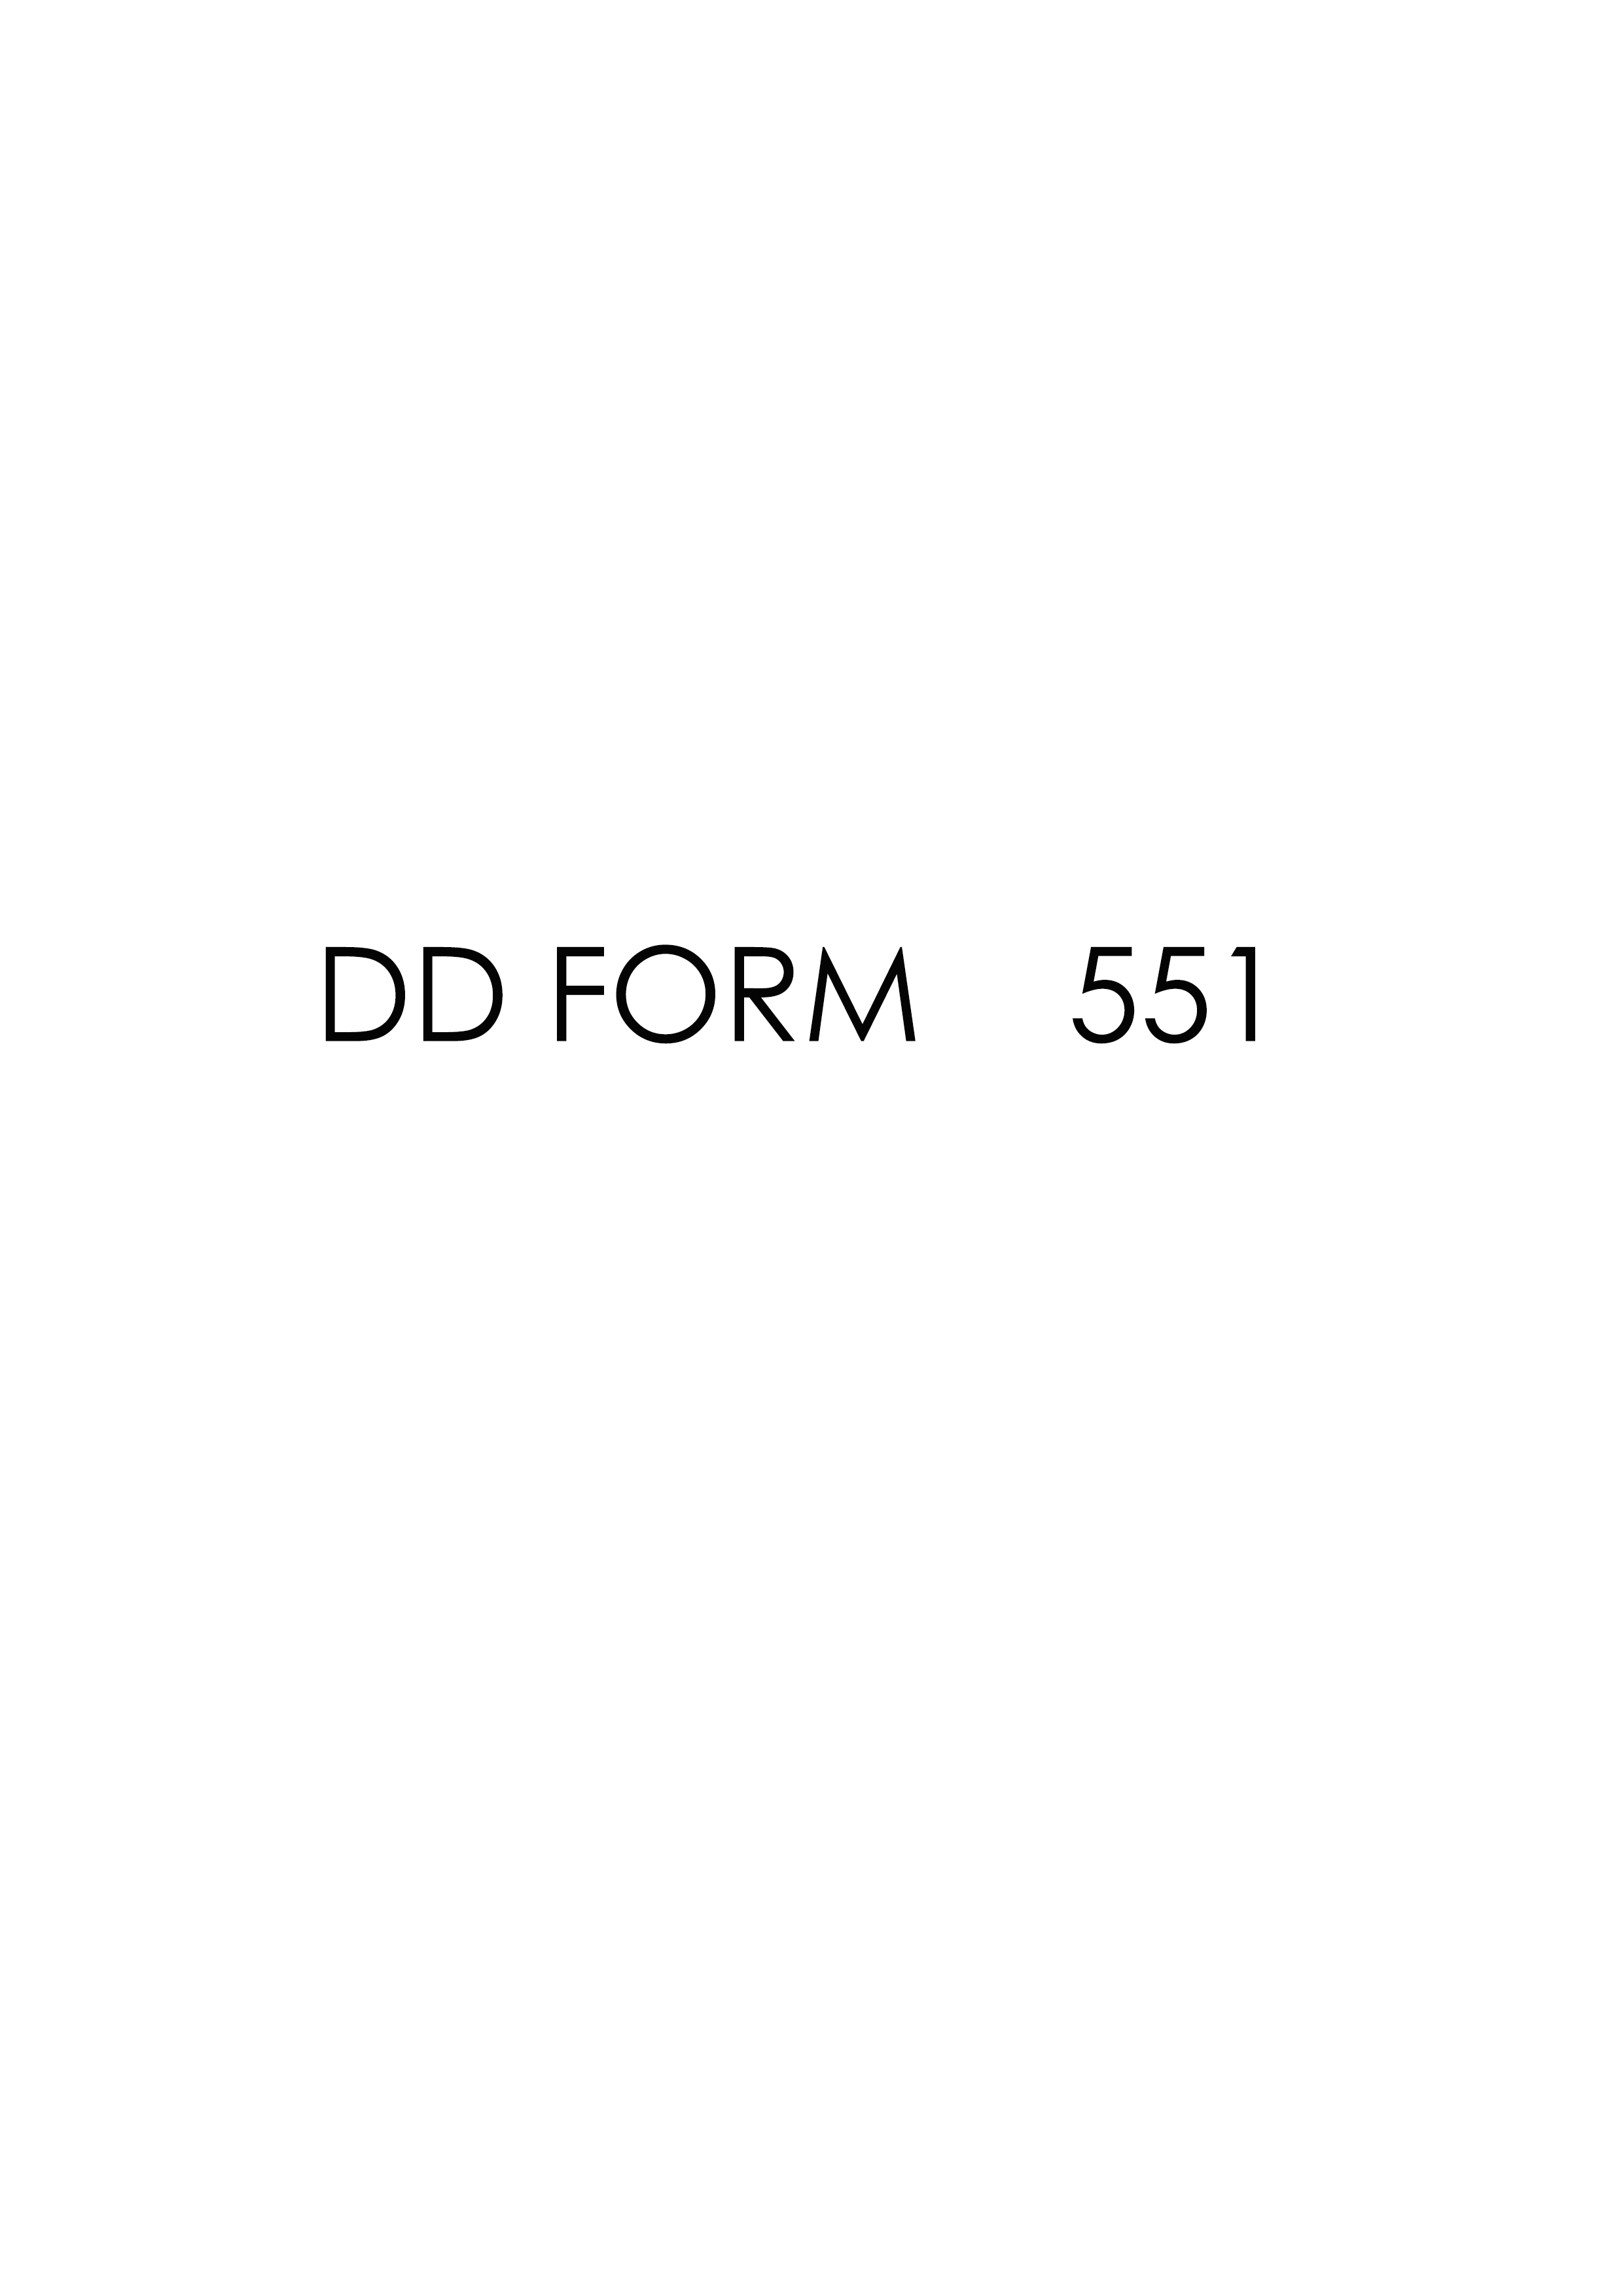 Download Fillable dd Form 551